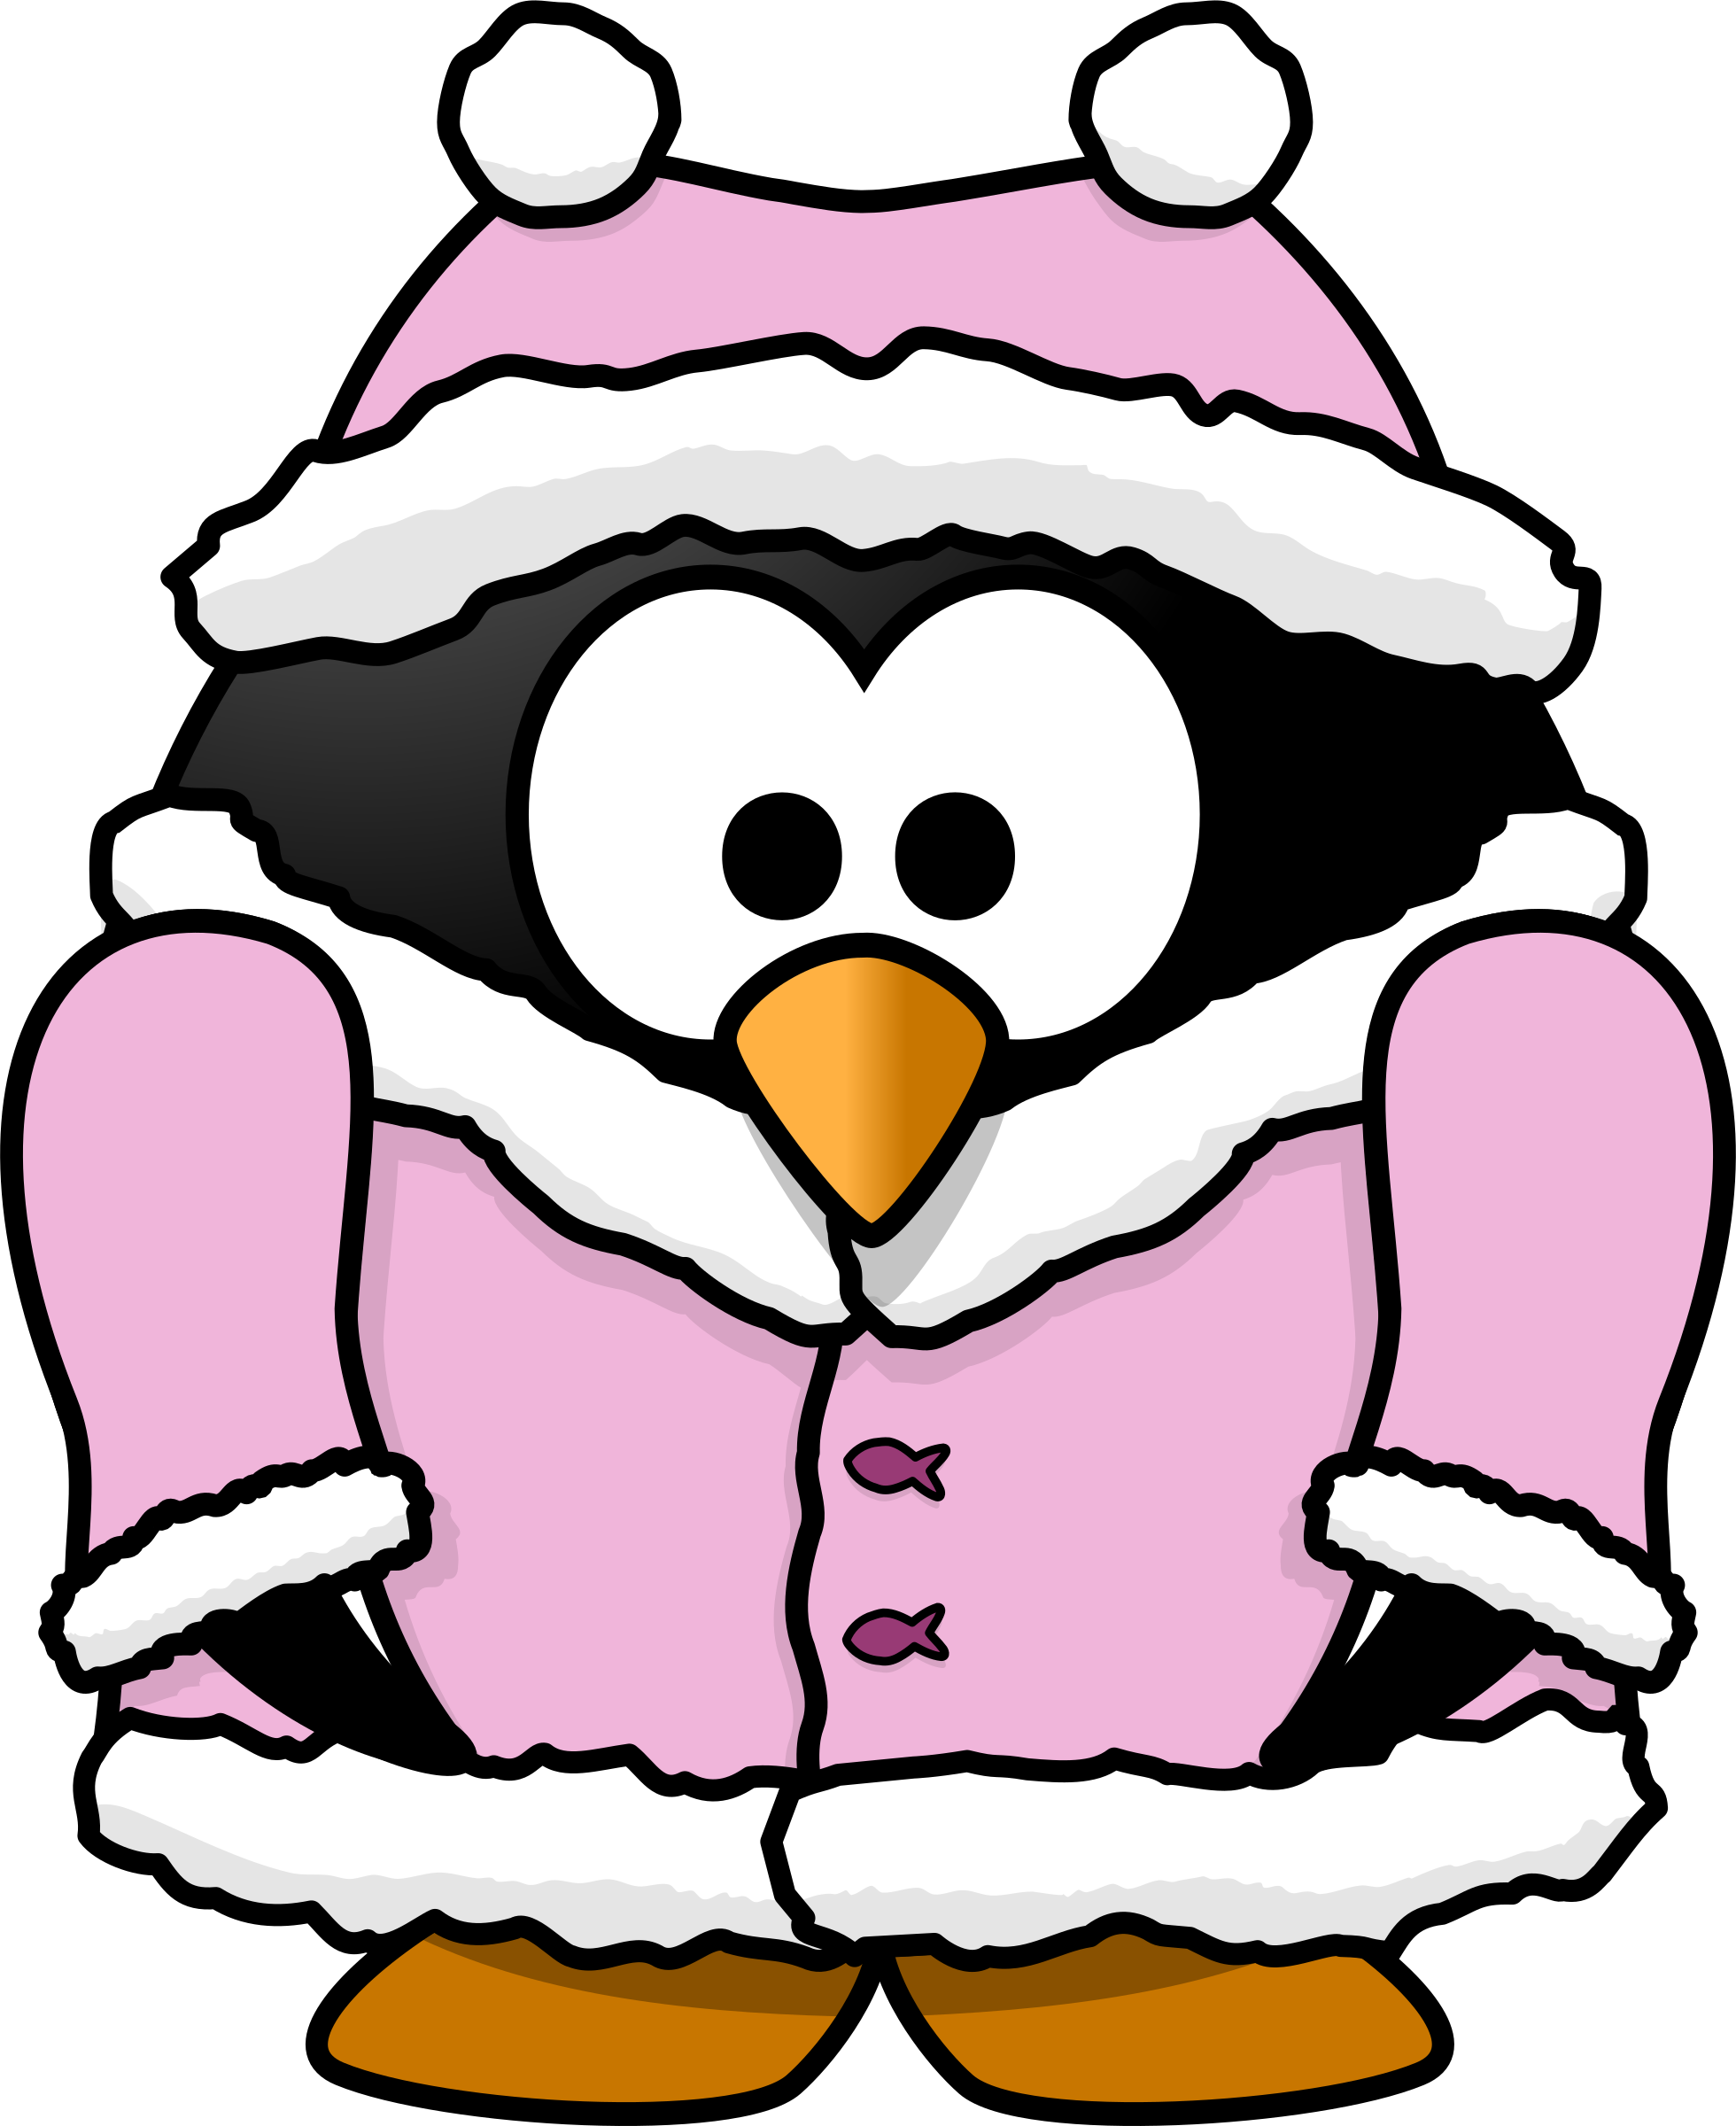 Winter clipart animated. Penguin chick big image